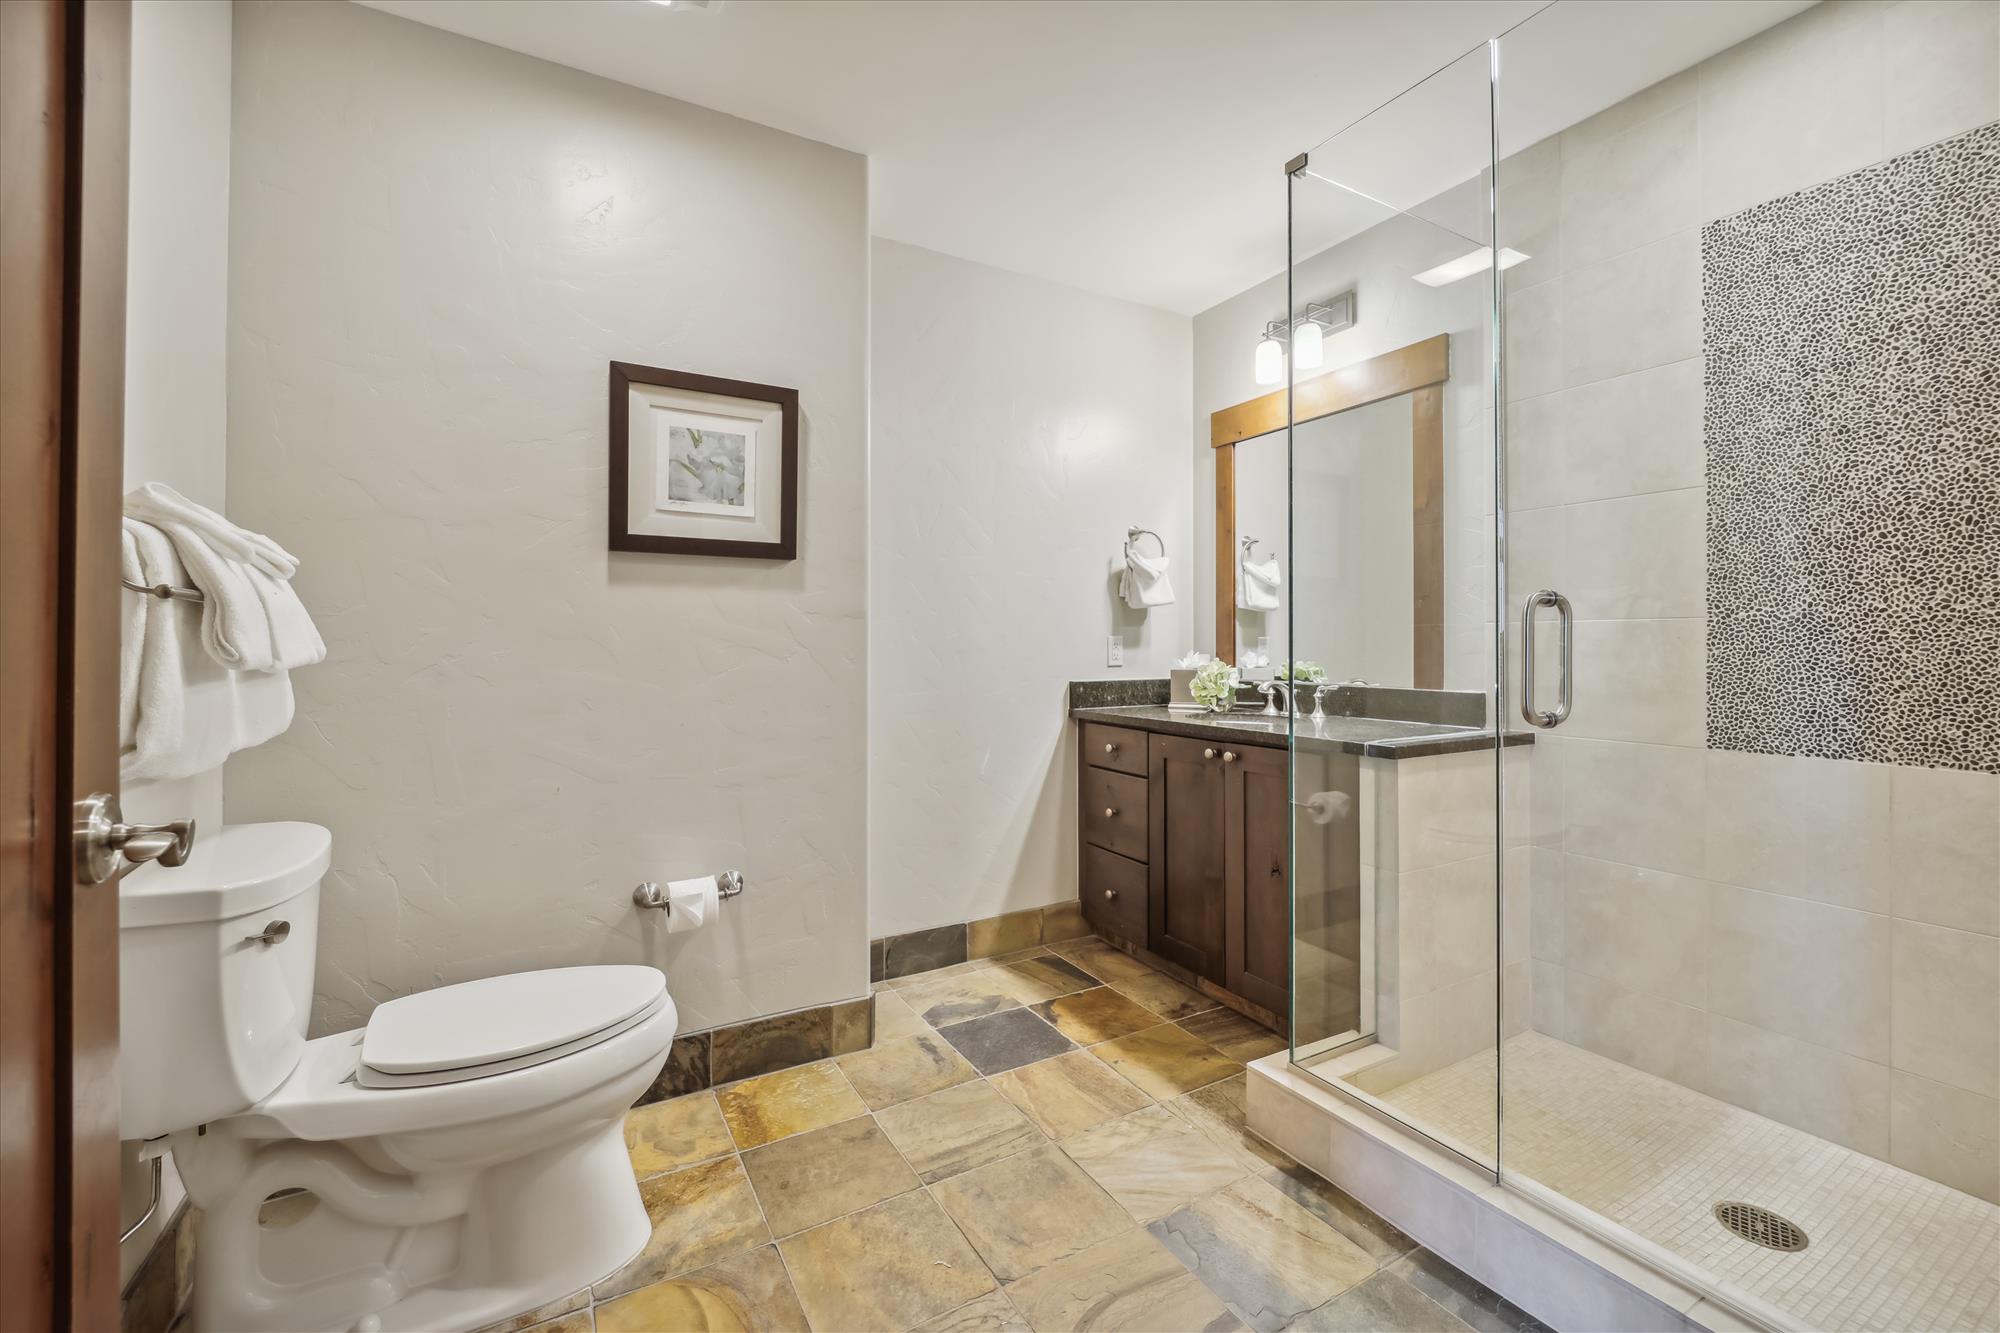 Shared bathroom - shared with bunk bedroom and common spaces - One Ski Hill Place 8424-Breckenridge Vacation Rental